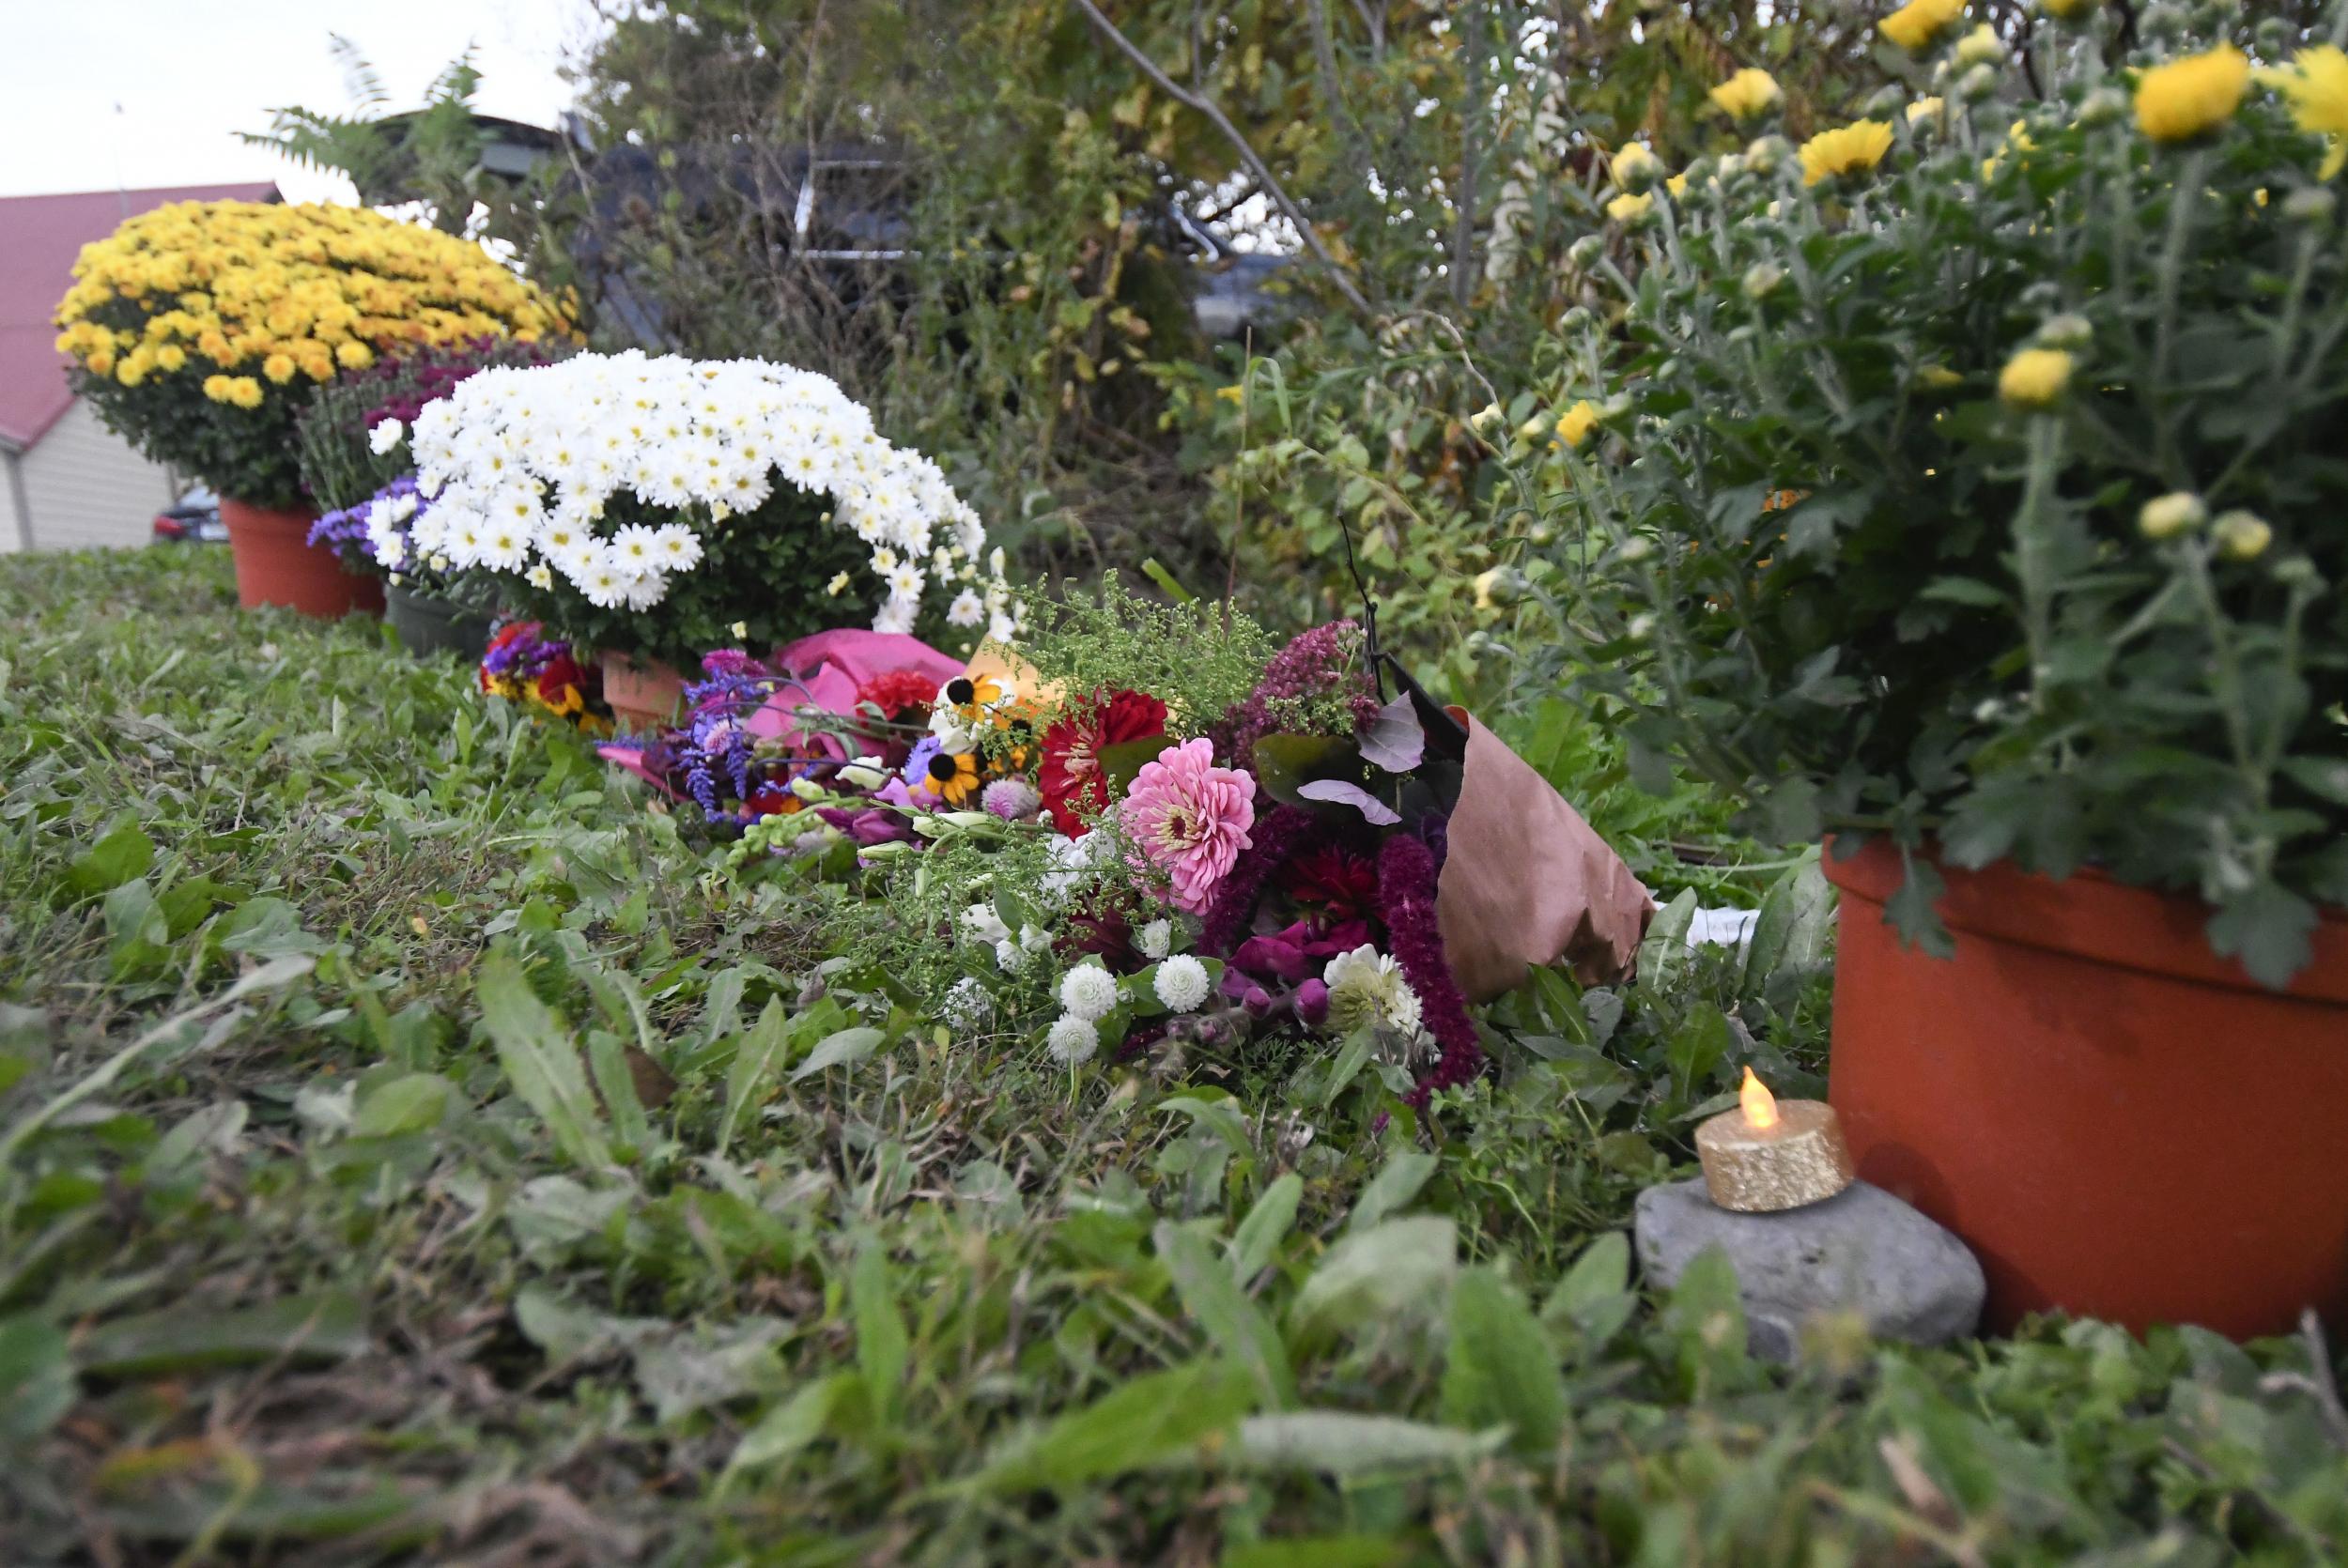 Flowers are placed at a roadside memorial at the scene of the fatal limousine crash which killed 20 people in Schoharie, New York. ( AP Photo/Hans Pennink)